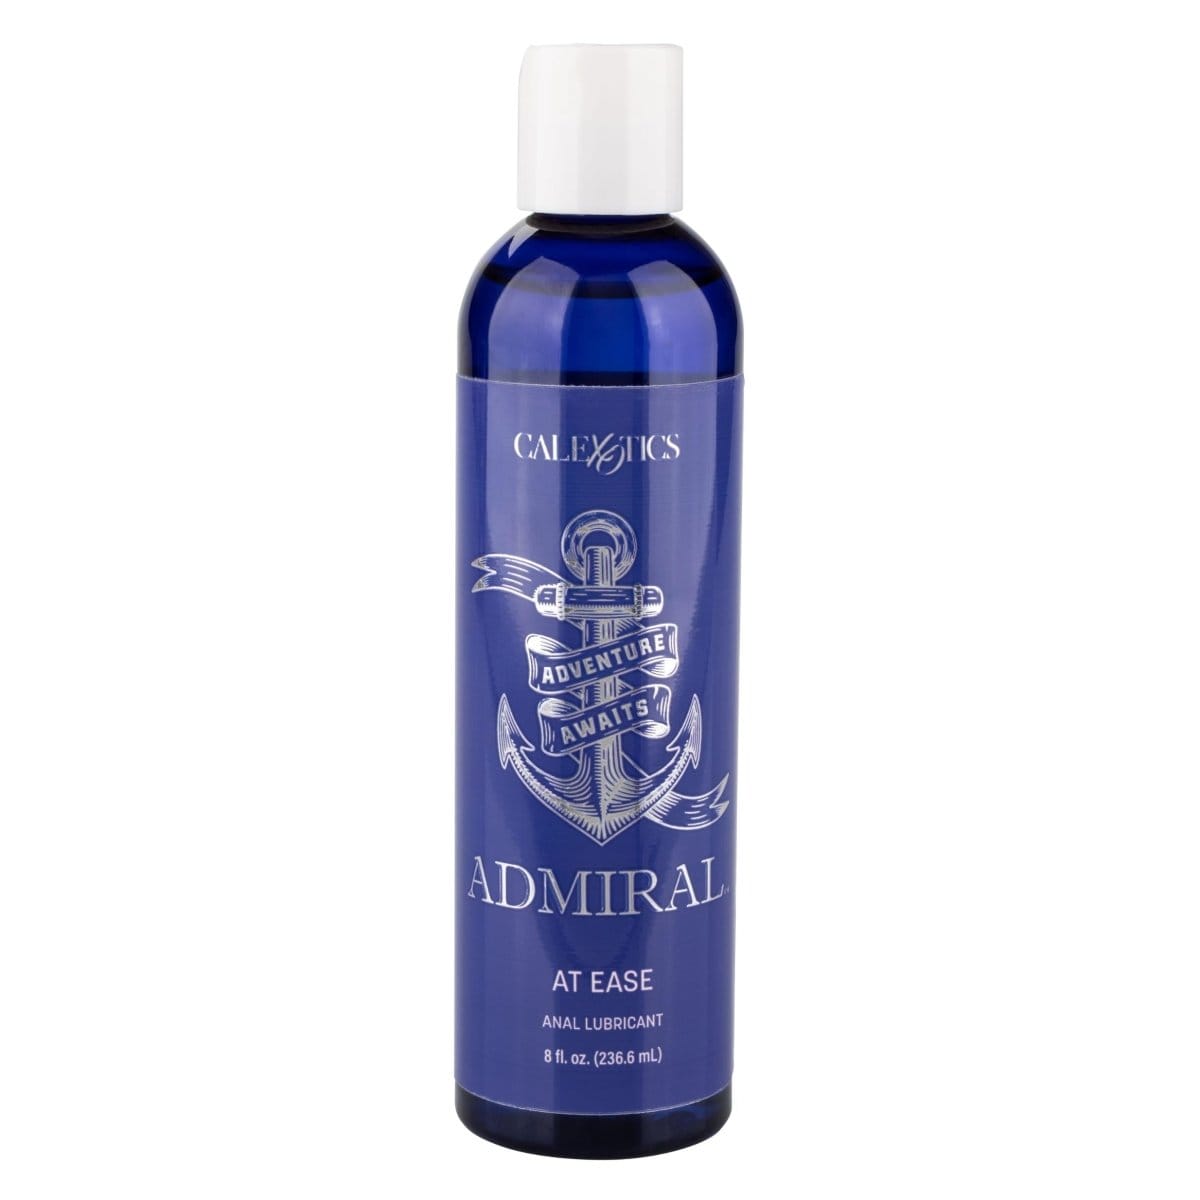 CalExotics Anal Toys Admiral At Ease Anal Lube 8oz at the Haus of Shag